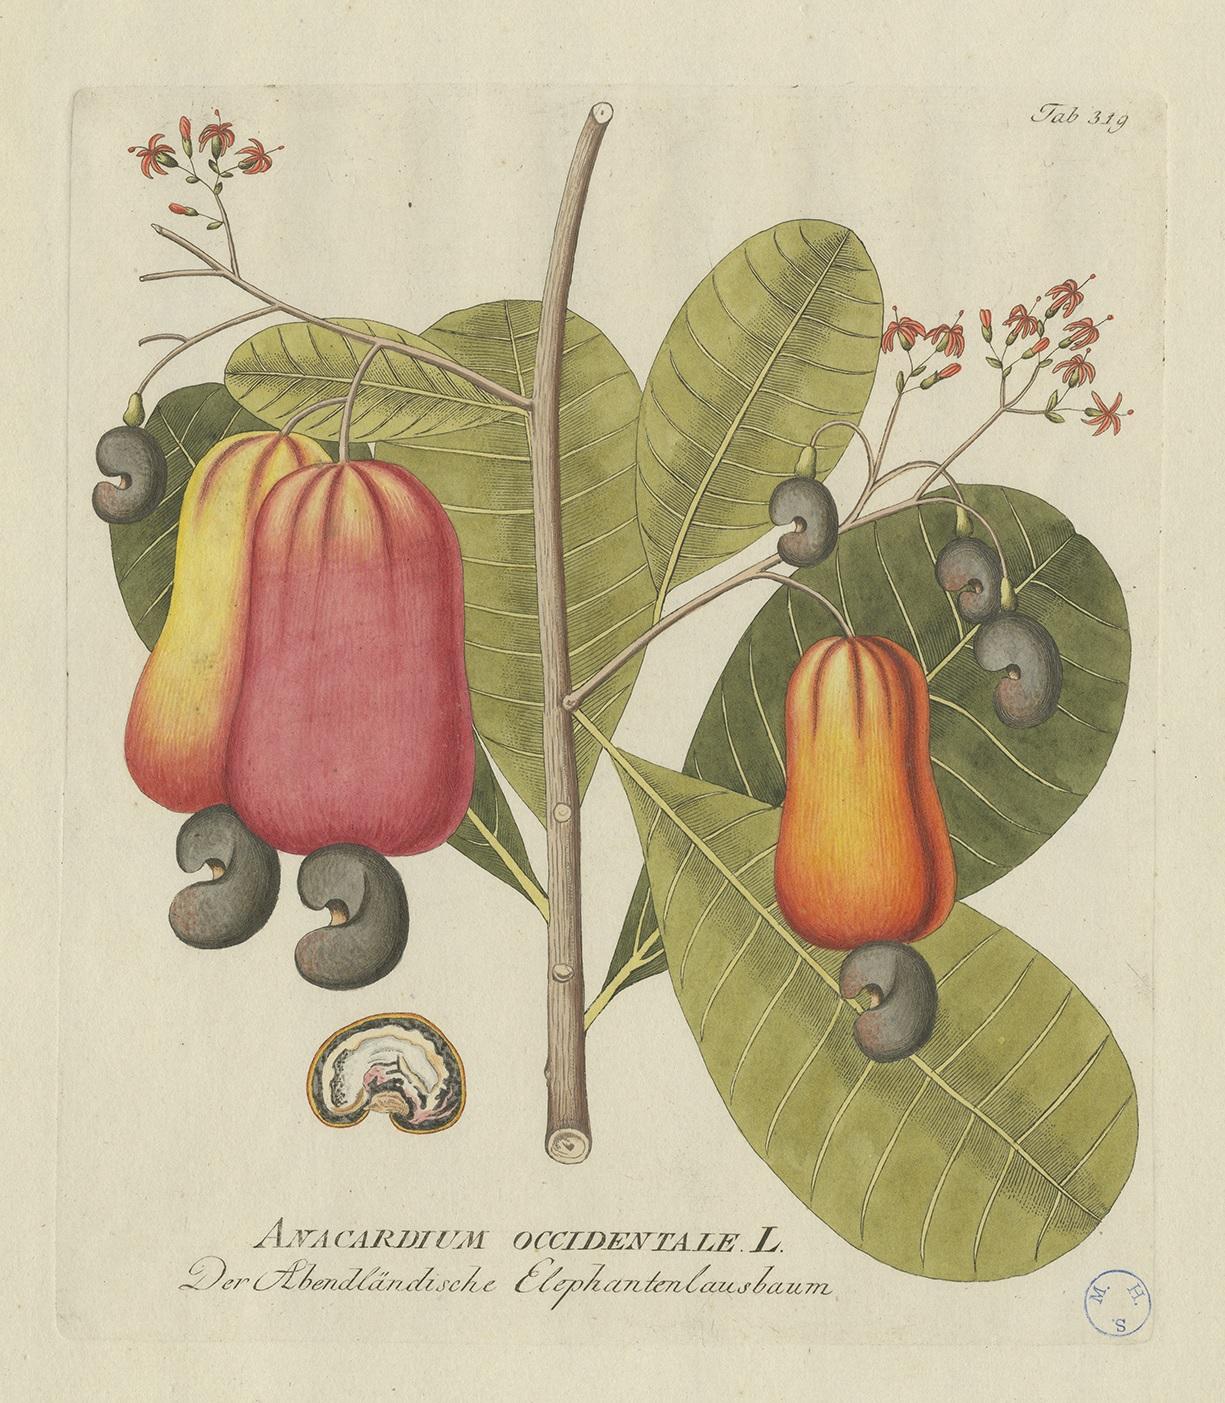 Antique botany print titled 'Anacardium Occidentale'. Hand colored engraving of a cashew tree. This print originates from 'Icones Plantarum Medicinalium (..)' by Joseph Jacob Plenck. Published between 1788 and 1803.